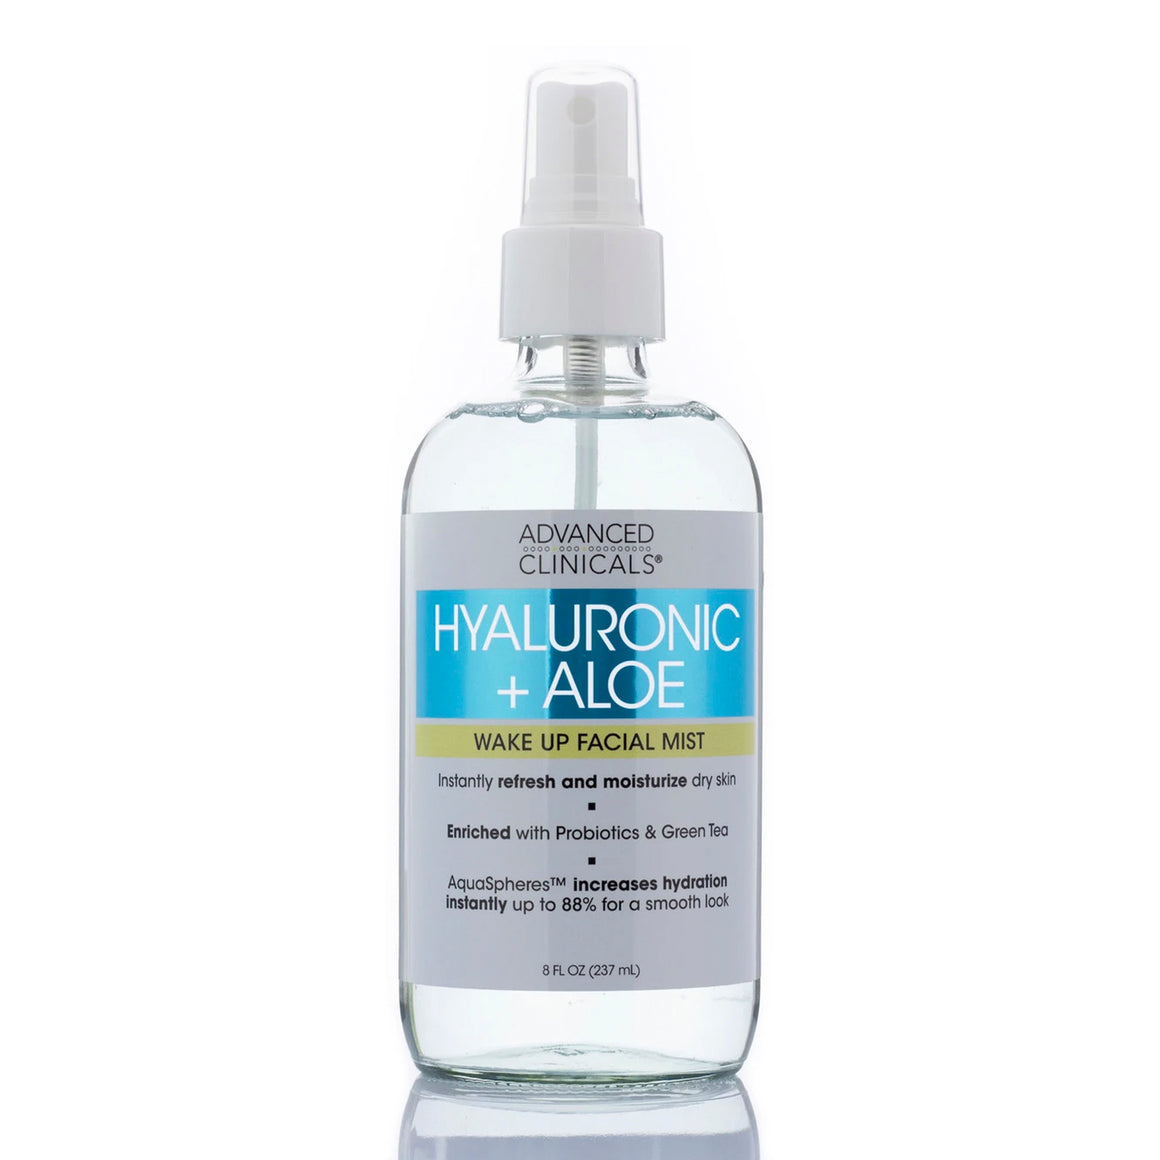 8oz hyaluronic and aloe wake up facial mist, with probiotics and green tea, increases hydration